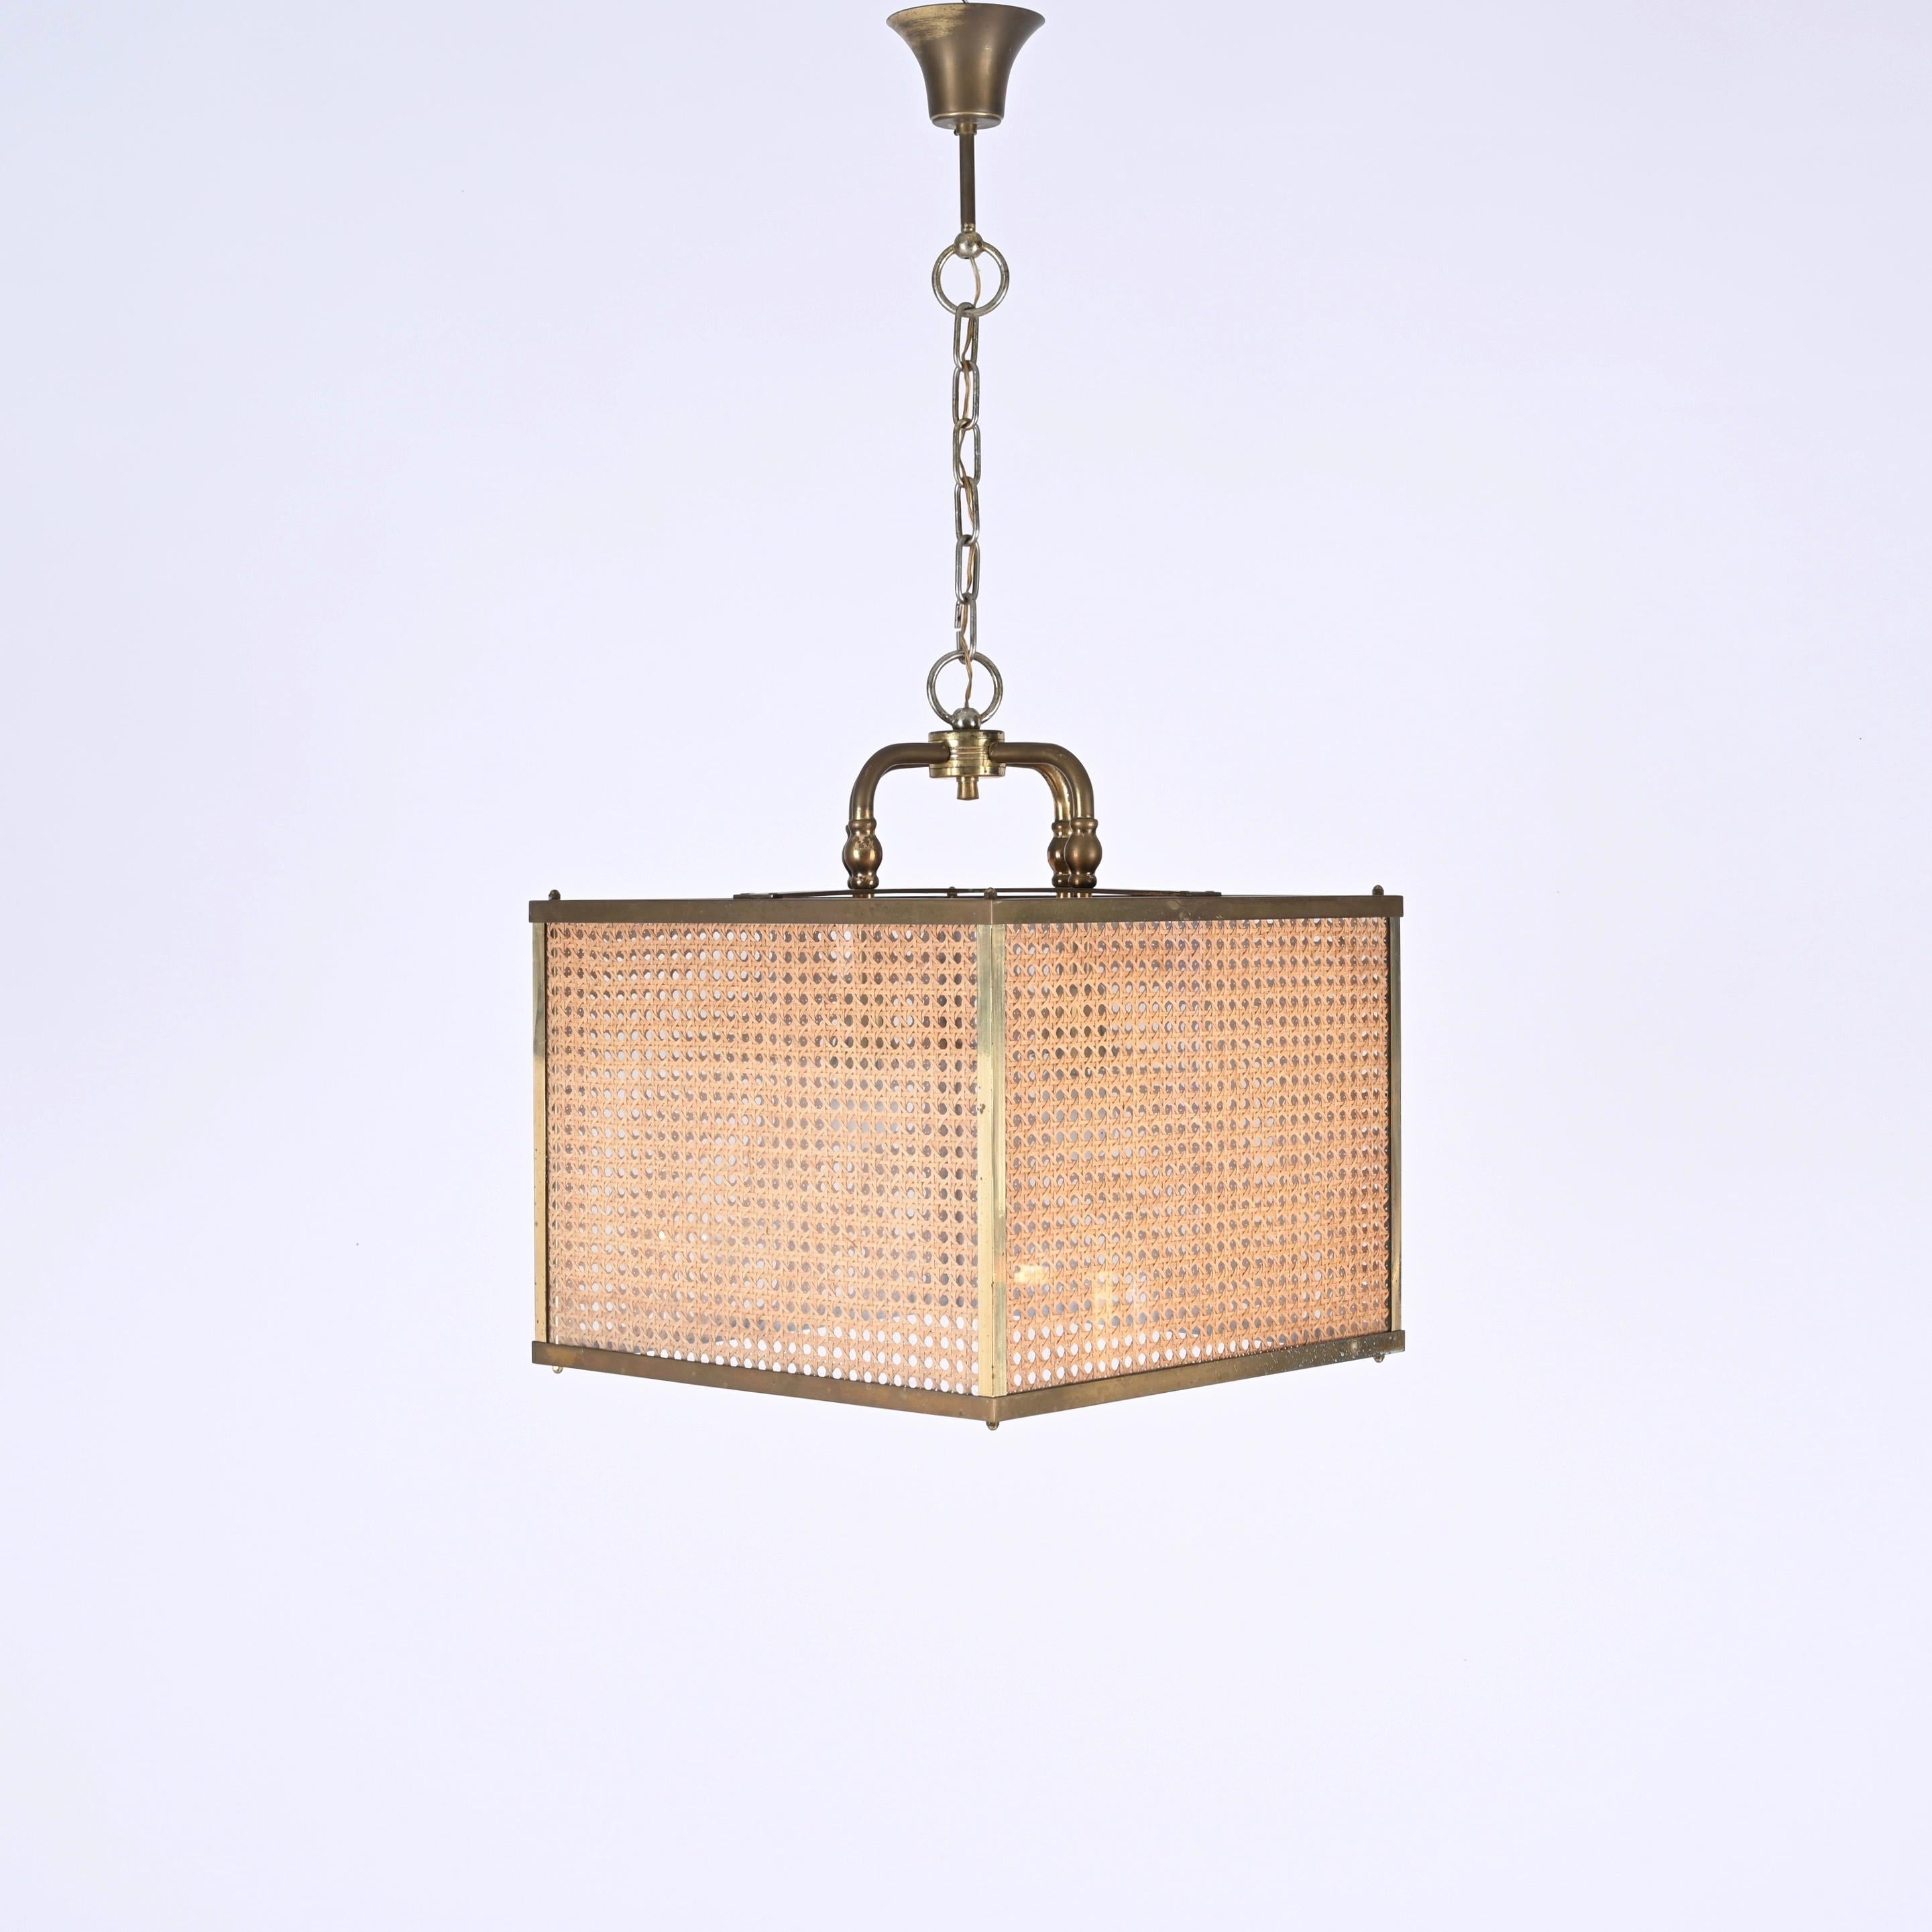 Mid-Century Modern Brass, Vienna Straw Wicker and Glass Square Chandelier Lamp, Italy, 1950s For Sale